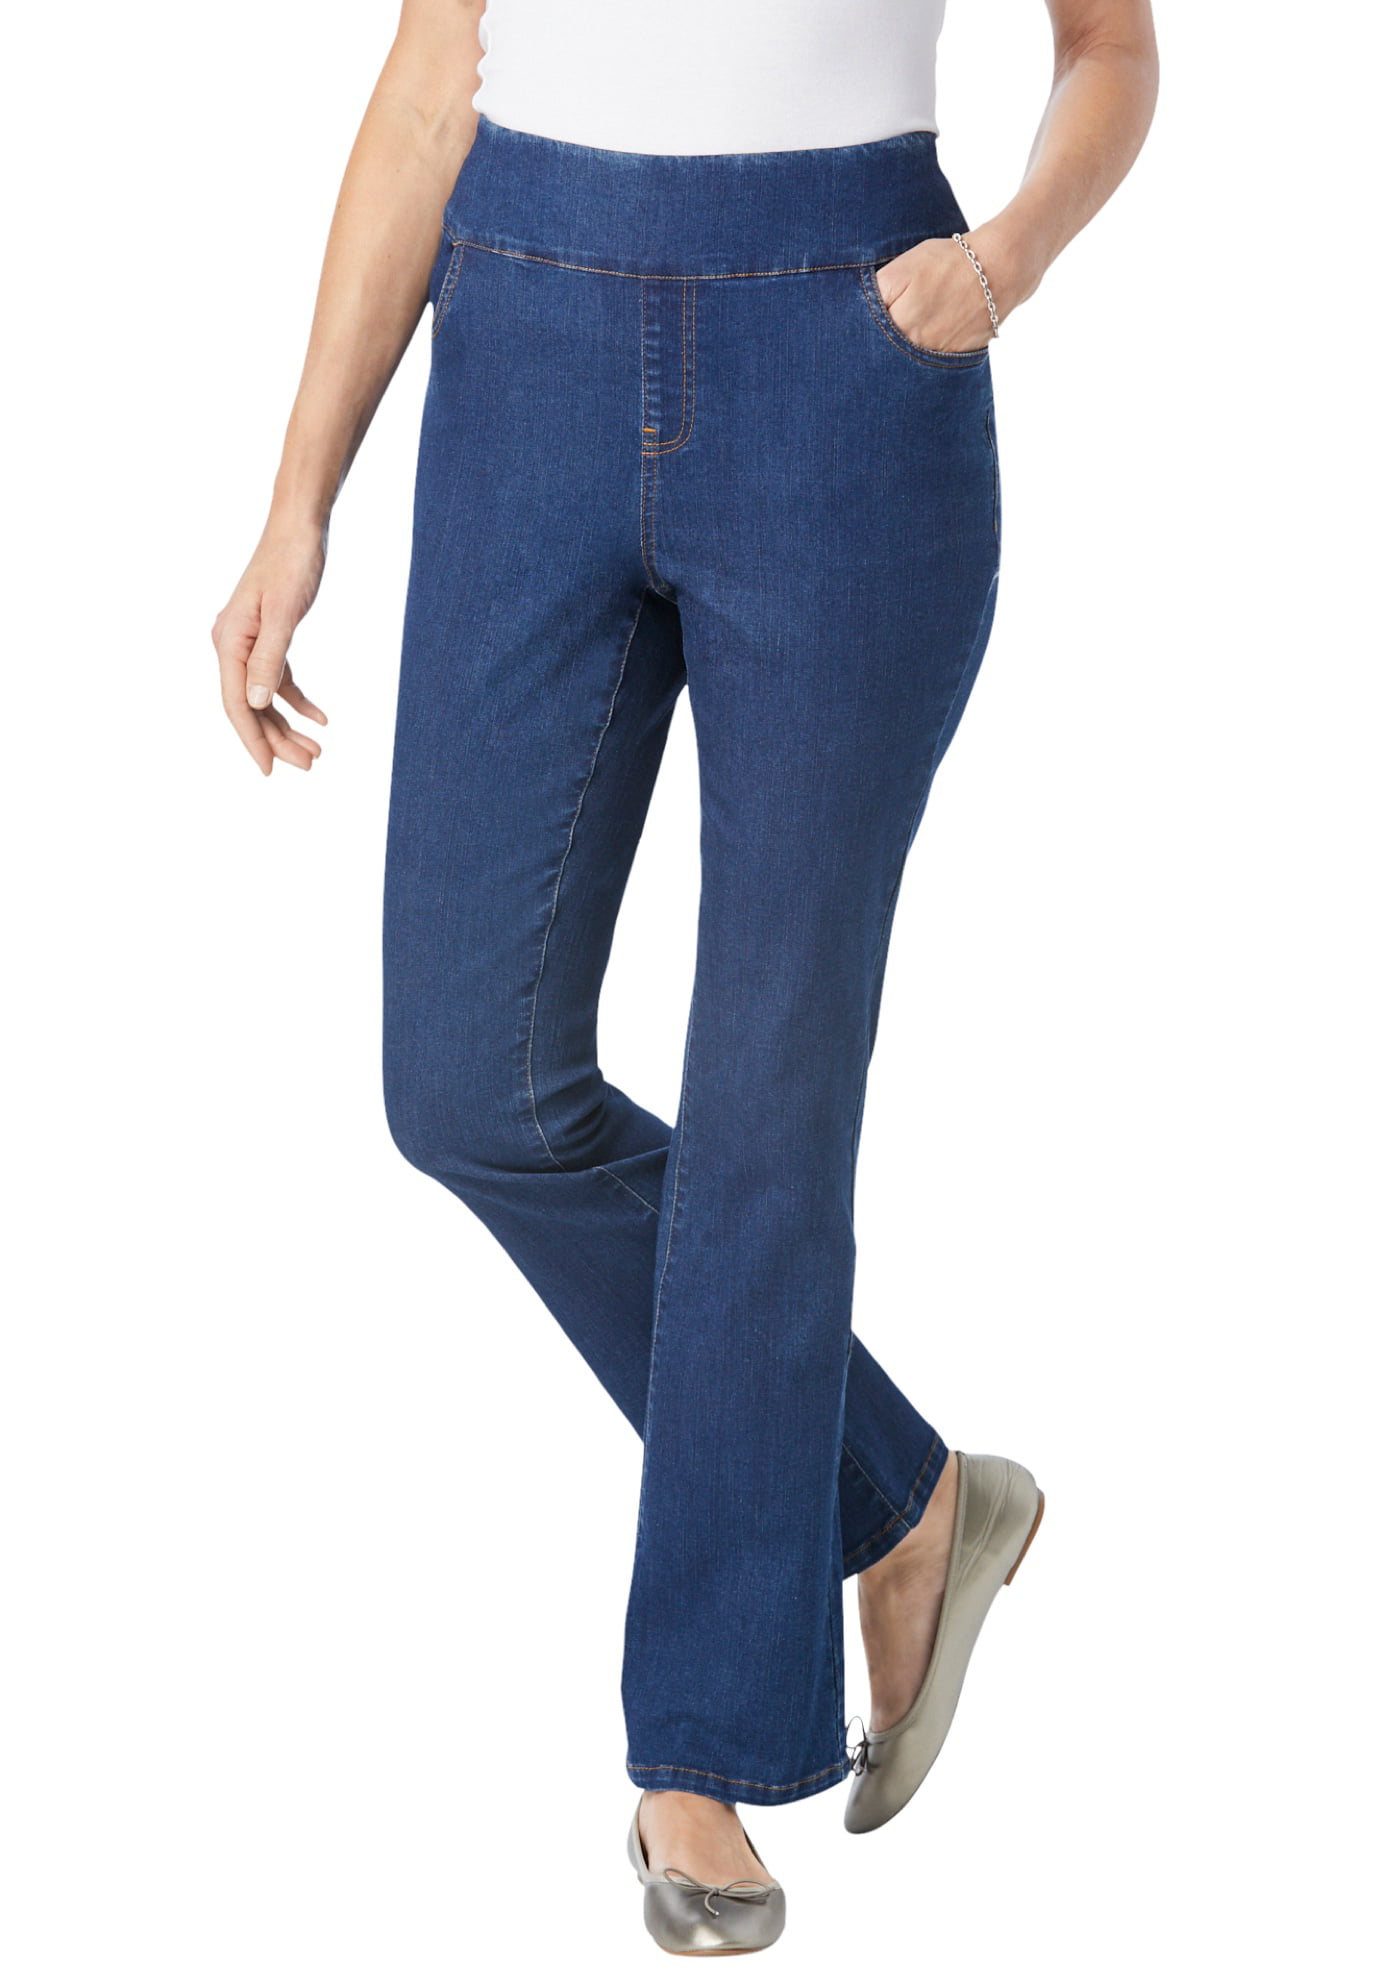 Woman Within - Woman Within Women's Plus Size Tall Pull-On Bootcut Jean ...